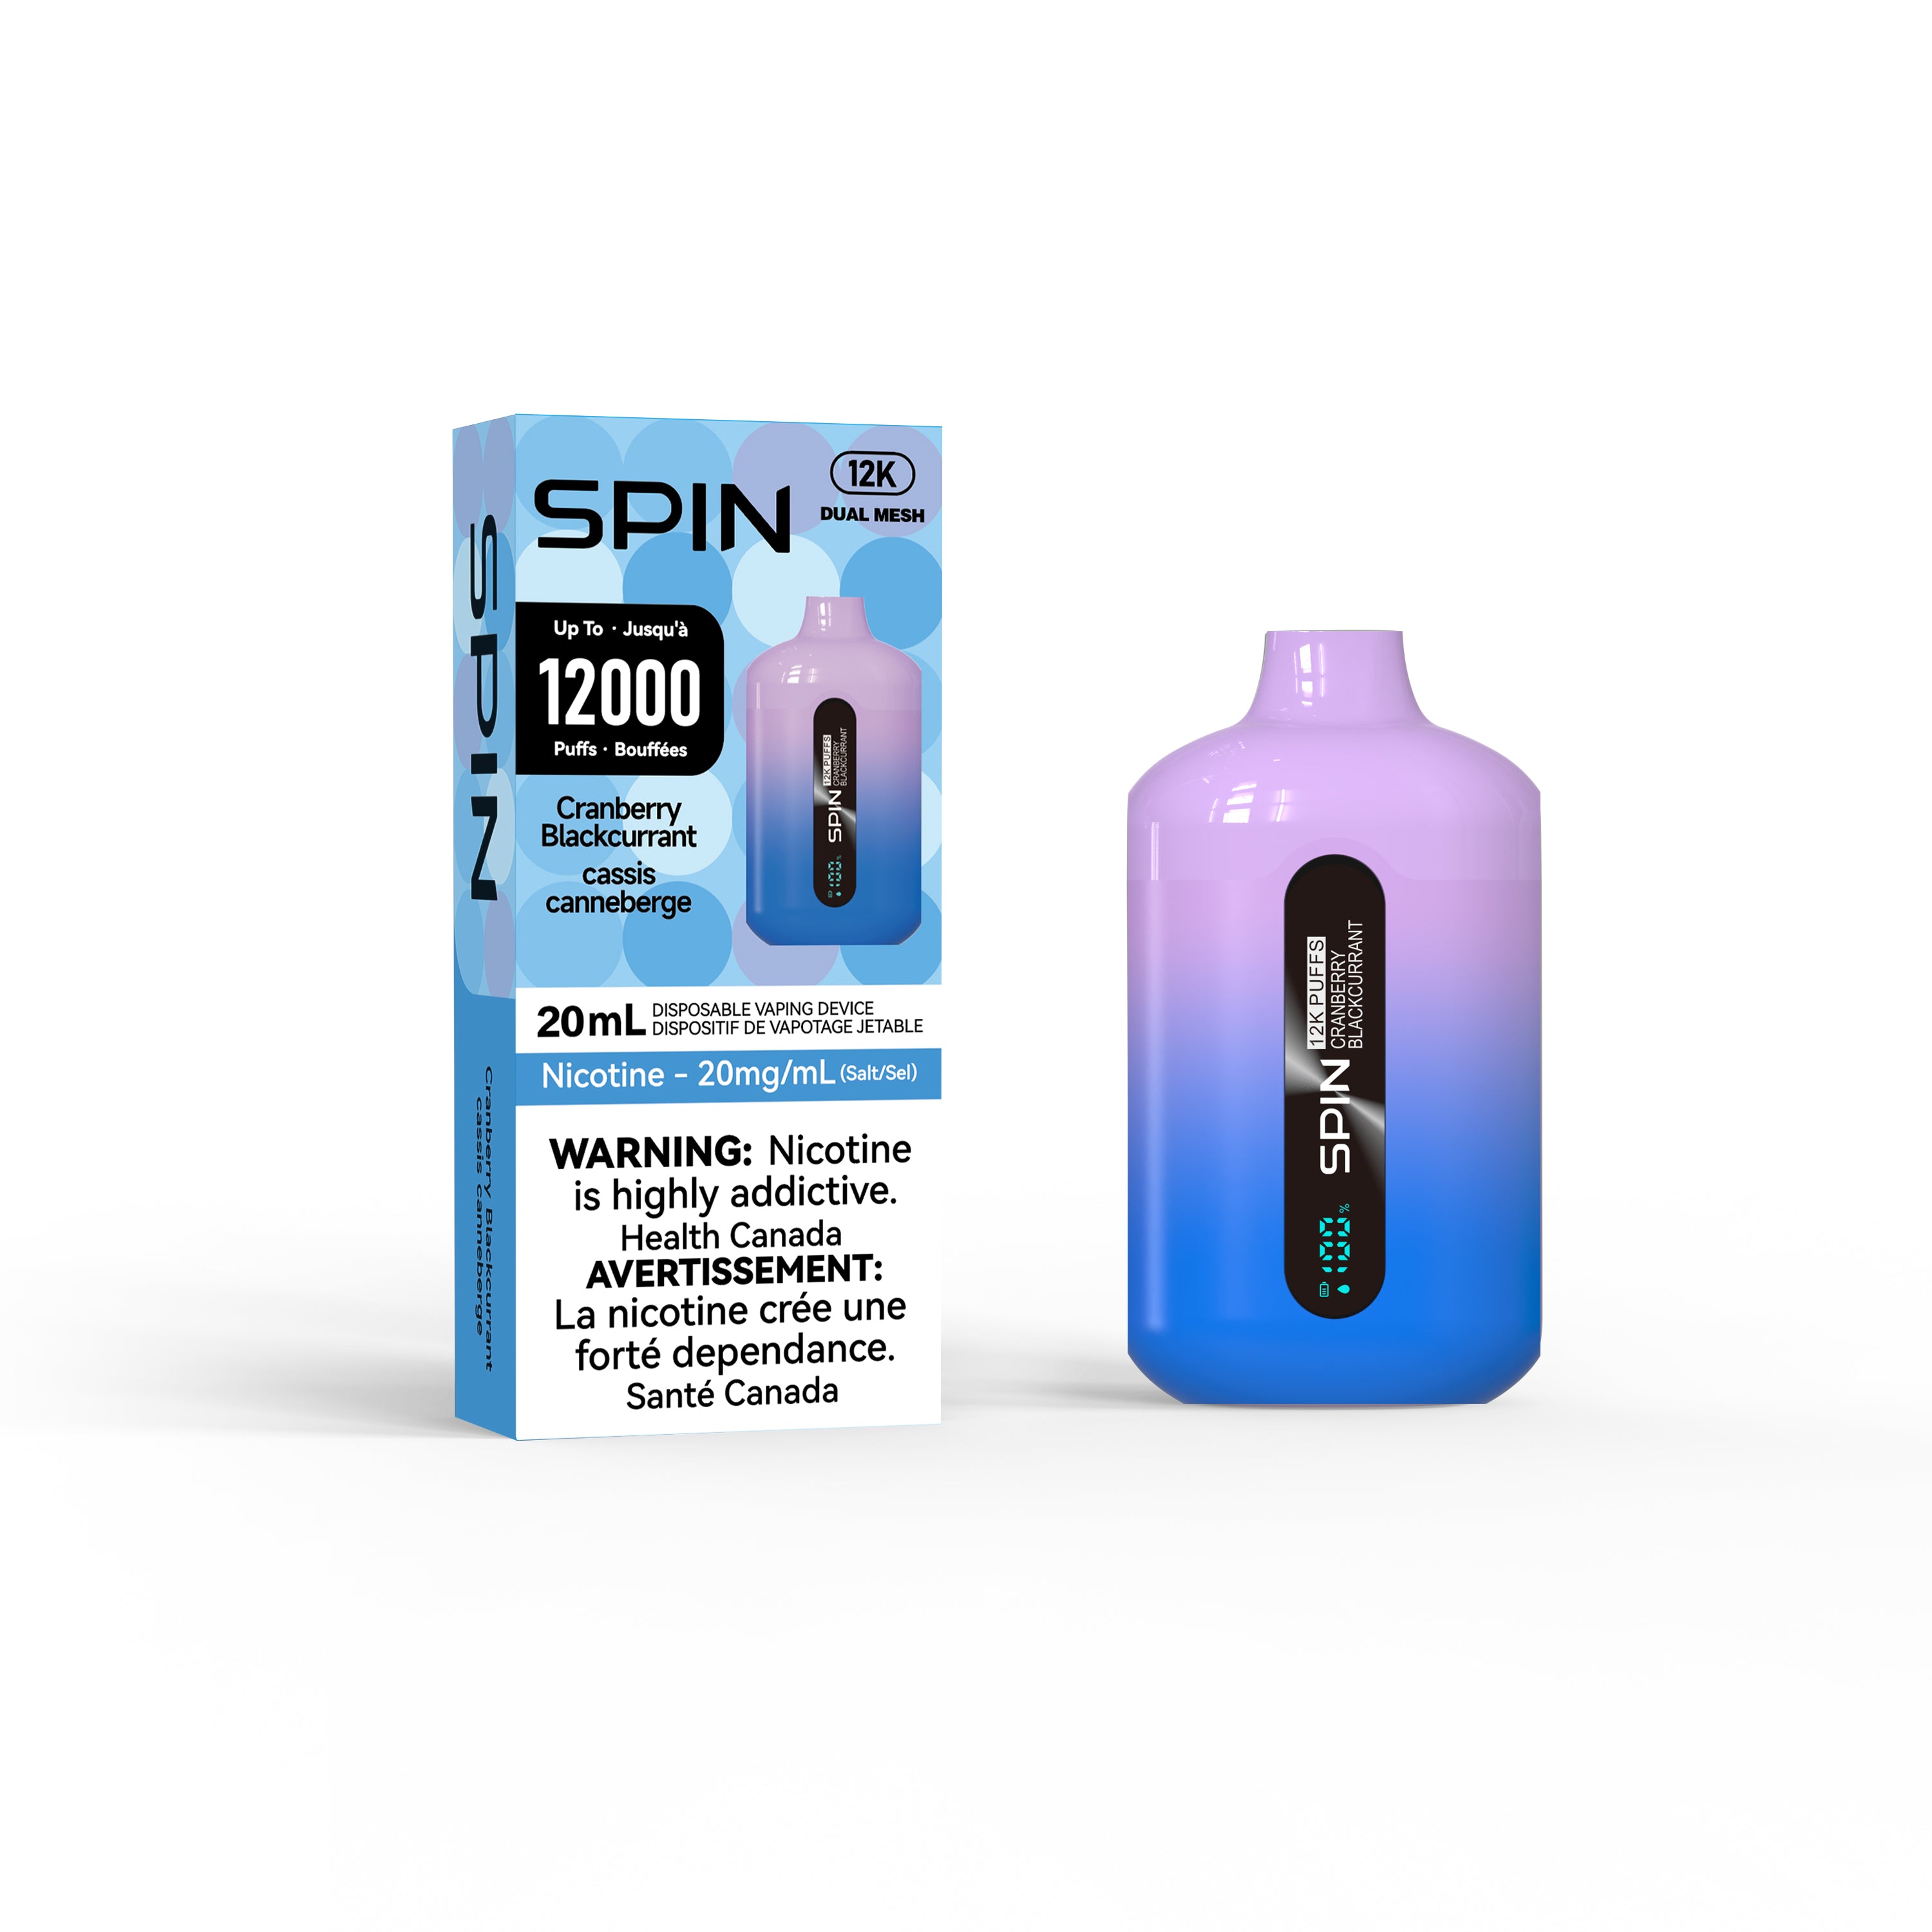 Spin 12K - Up to 12000 Puffs - Cranberry Blackcurrant